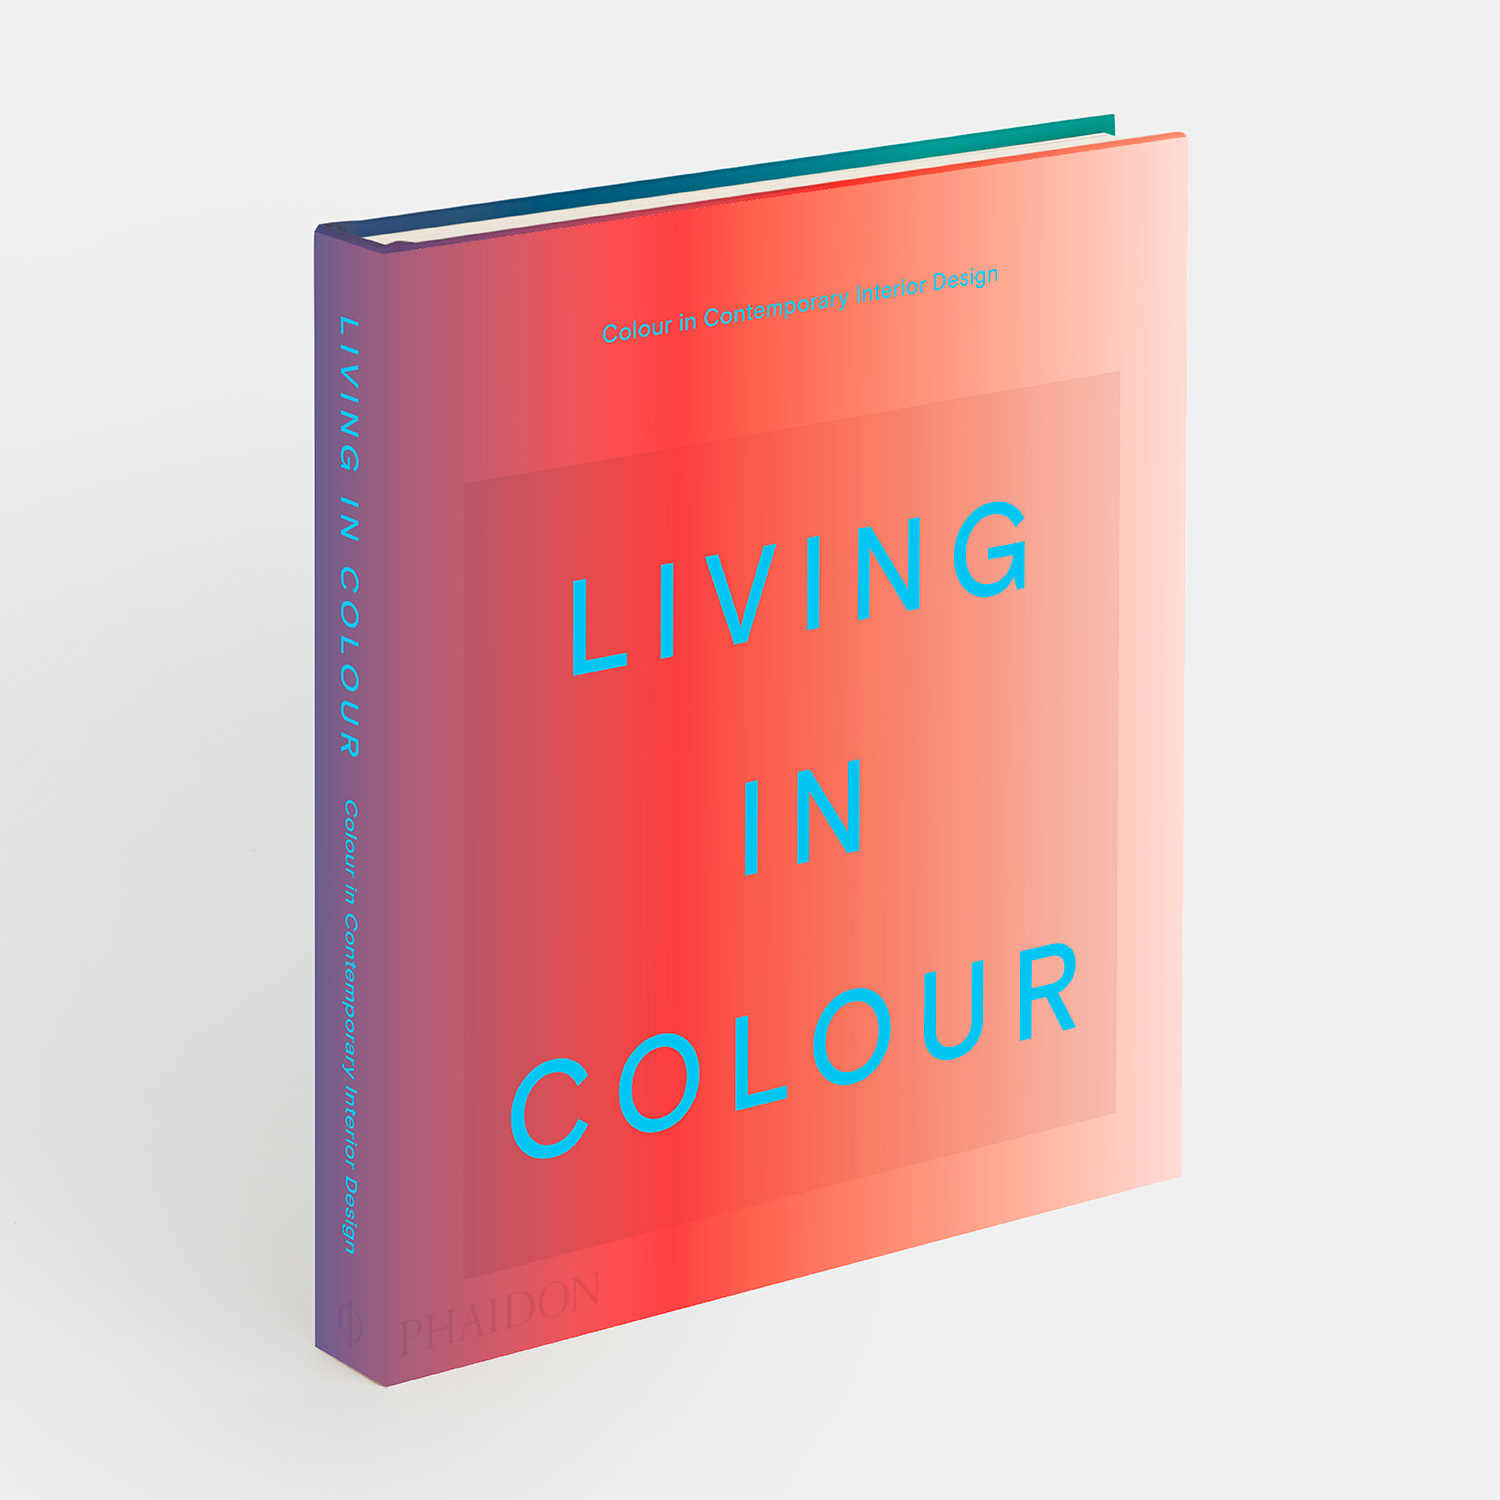 Living in Colour